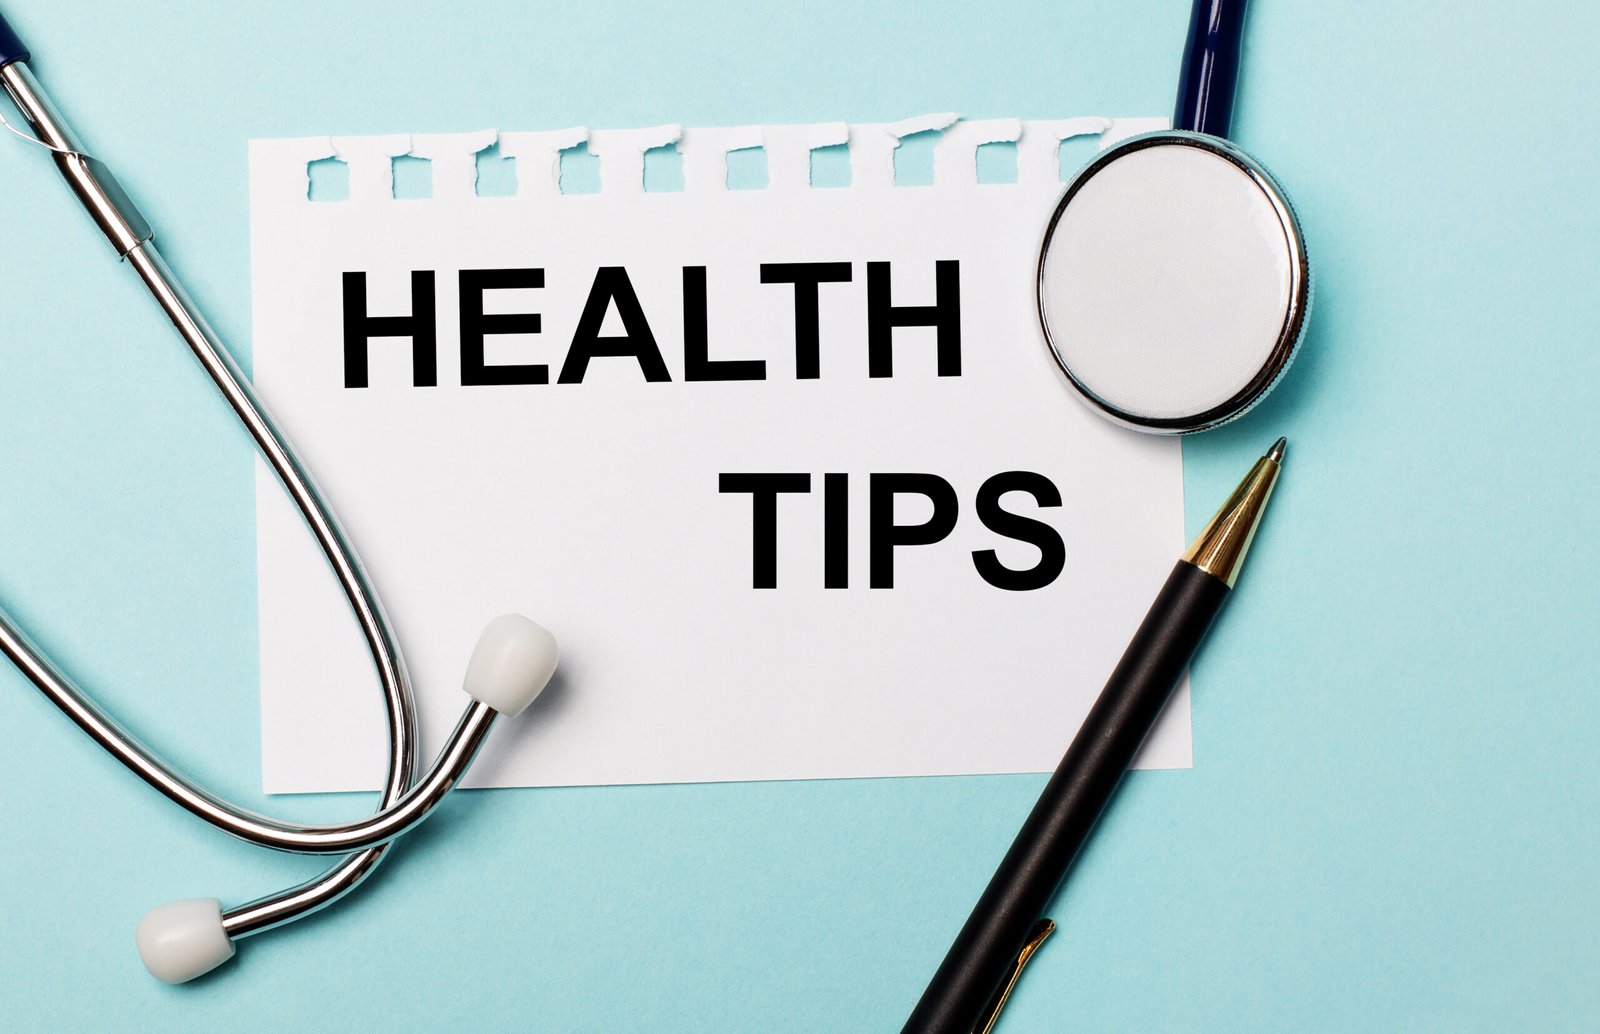 What are 10 tips for good health?